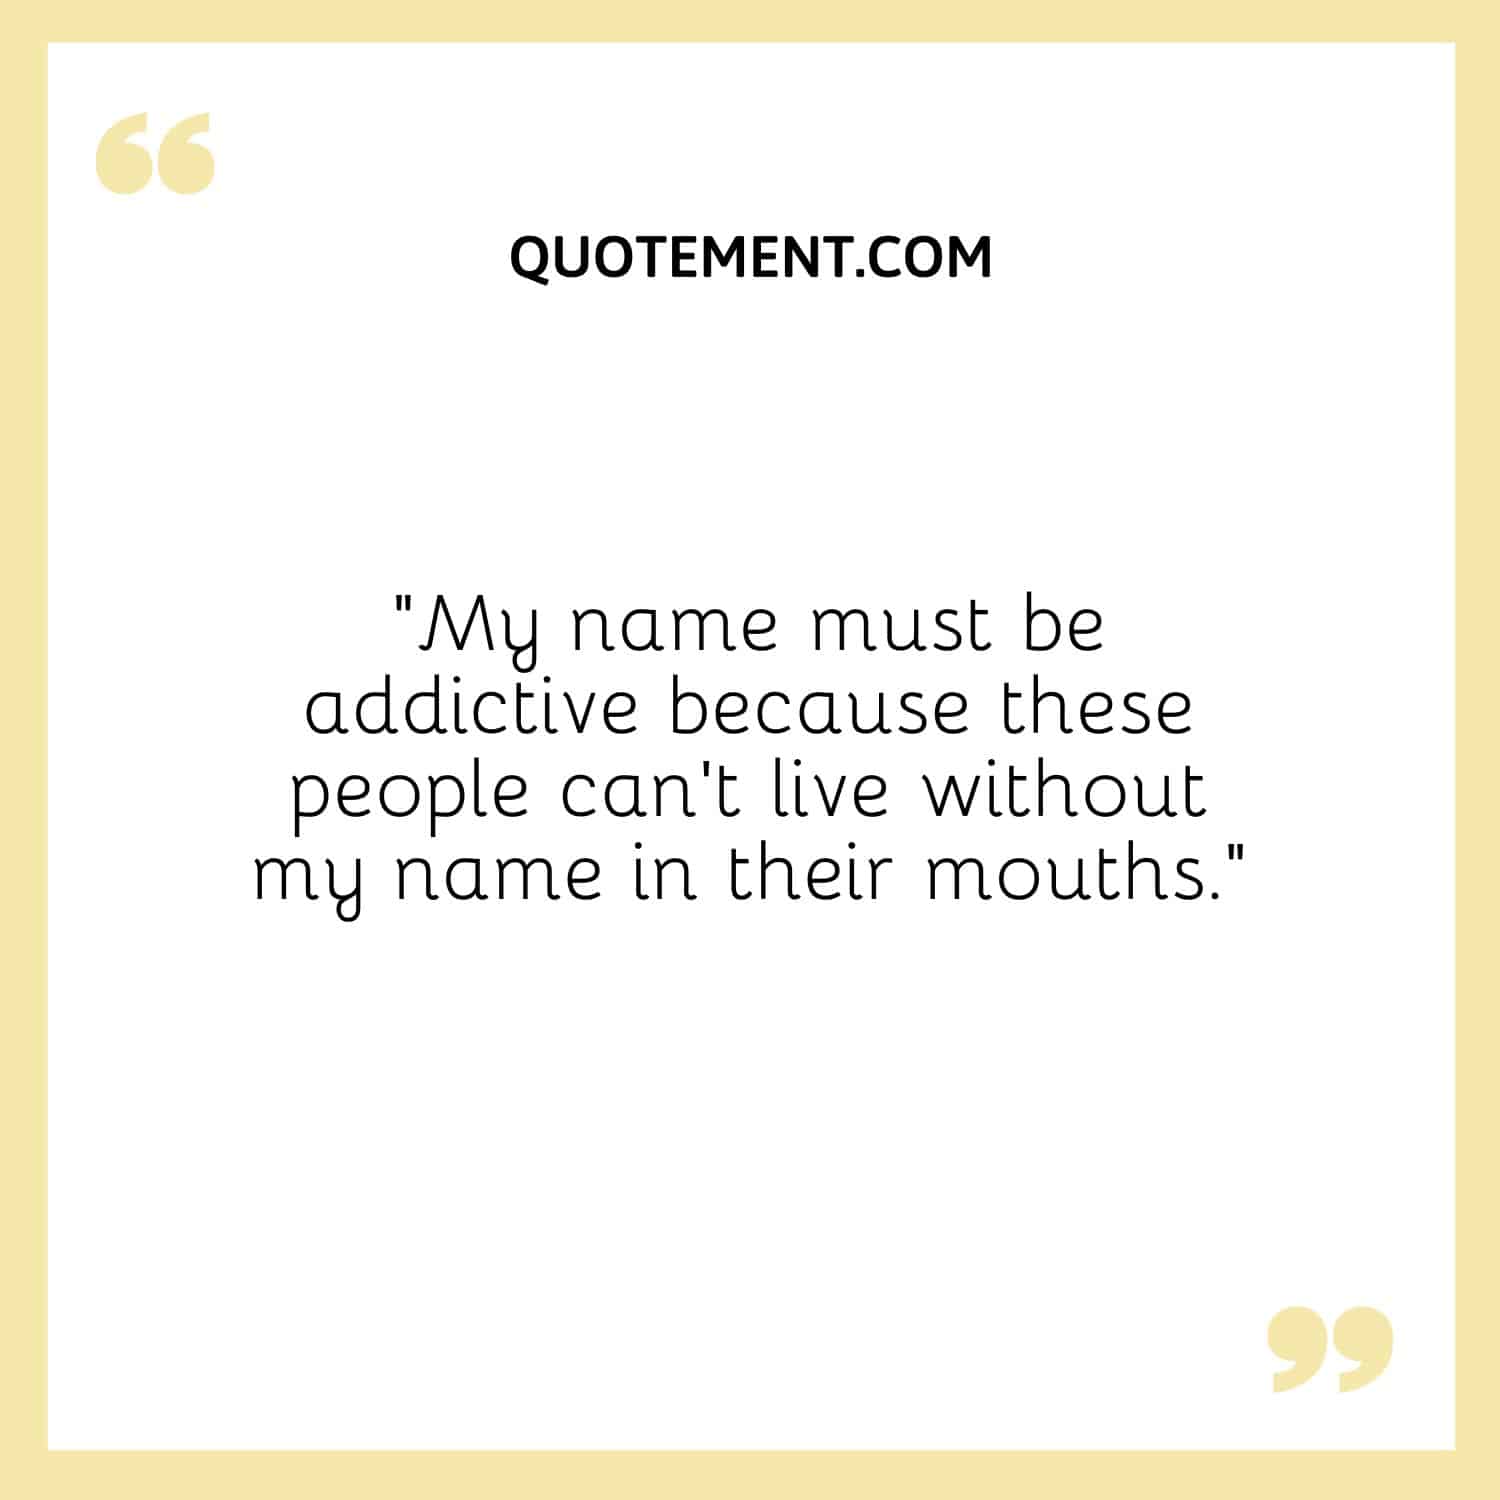 “My name must be addictive because these people can't live without my name in their mouths.”